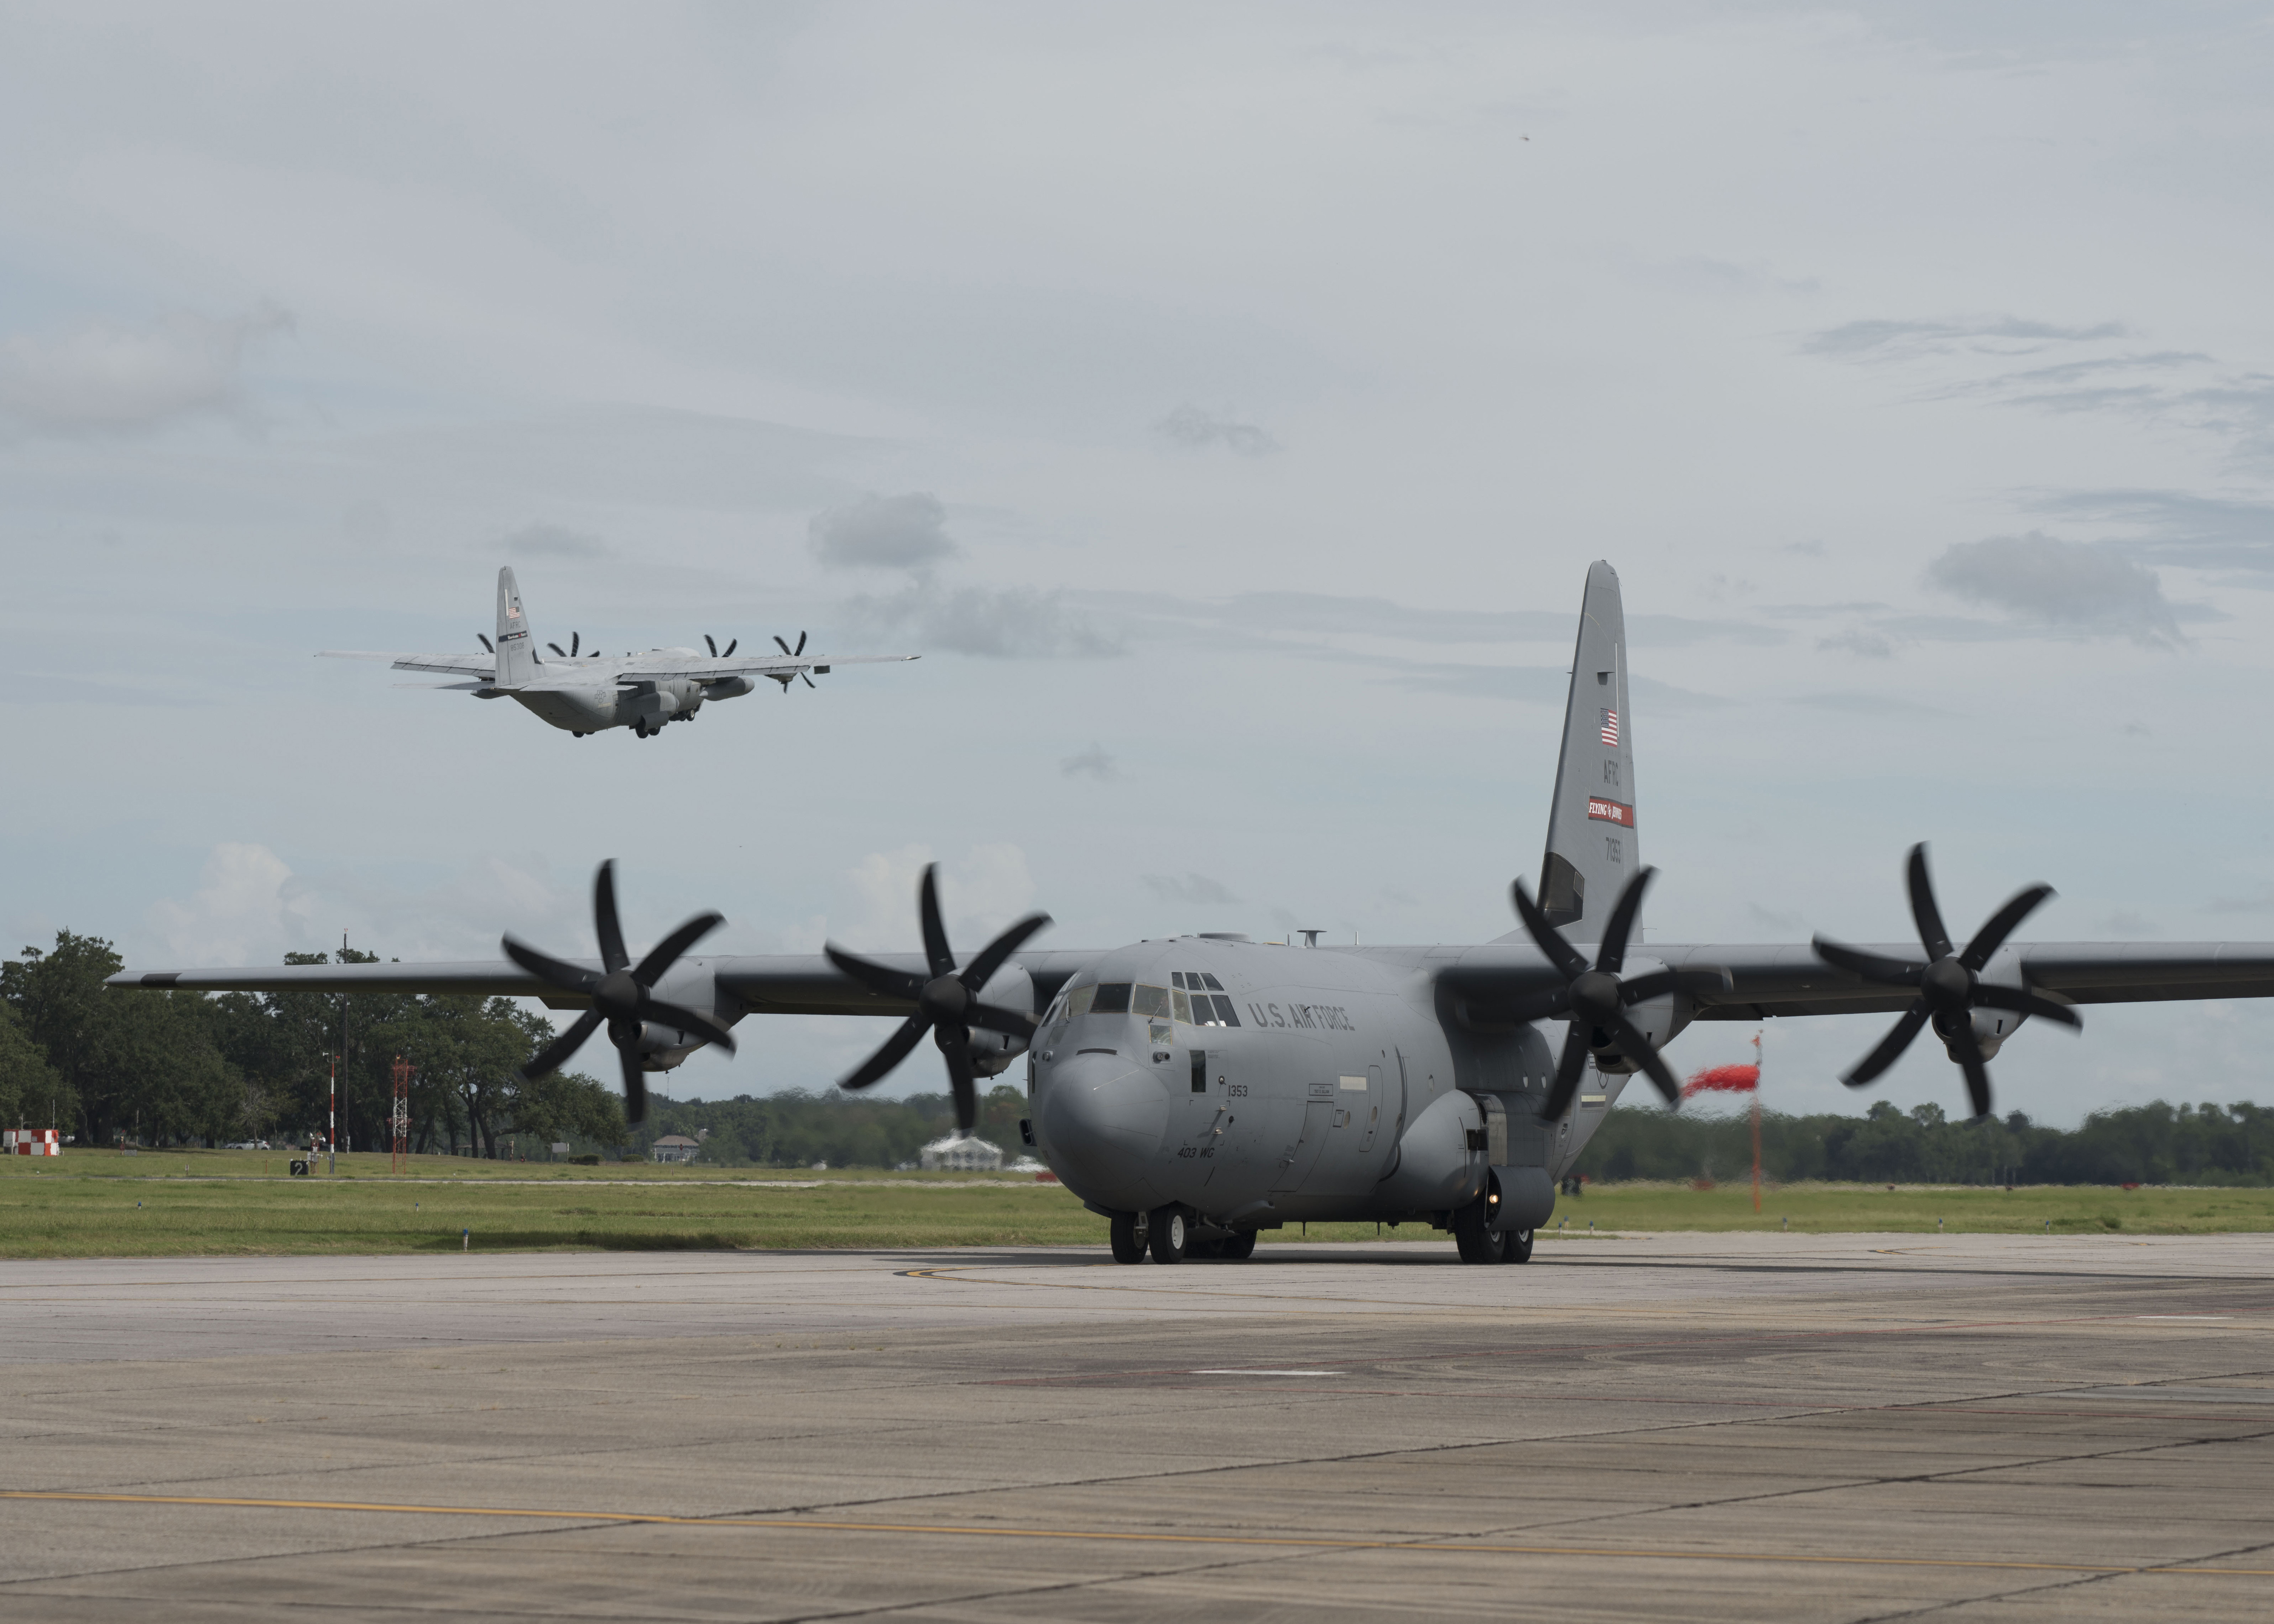 The Air Force Reserve's 403rd Wing, Keesler Air Force Base, Mississippi, relocated its aircraft today as Hurricane Marco and Tropical Storm Laura make their way to the U.S. Gulf Coast. The 815th Airlift Squadron relocated their aircraft to Joint Base San Antonio, Texas, and the 53rd Weather Reconnaissance Squadron will continue flying missions into both storms from Atlantic Aviation Charleston International Airport, South Carolina. (U.S. Air Force photo/Lt. Col. Marnee A.C. Losurdo)